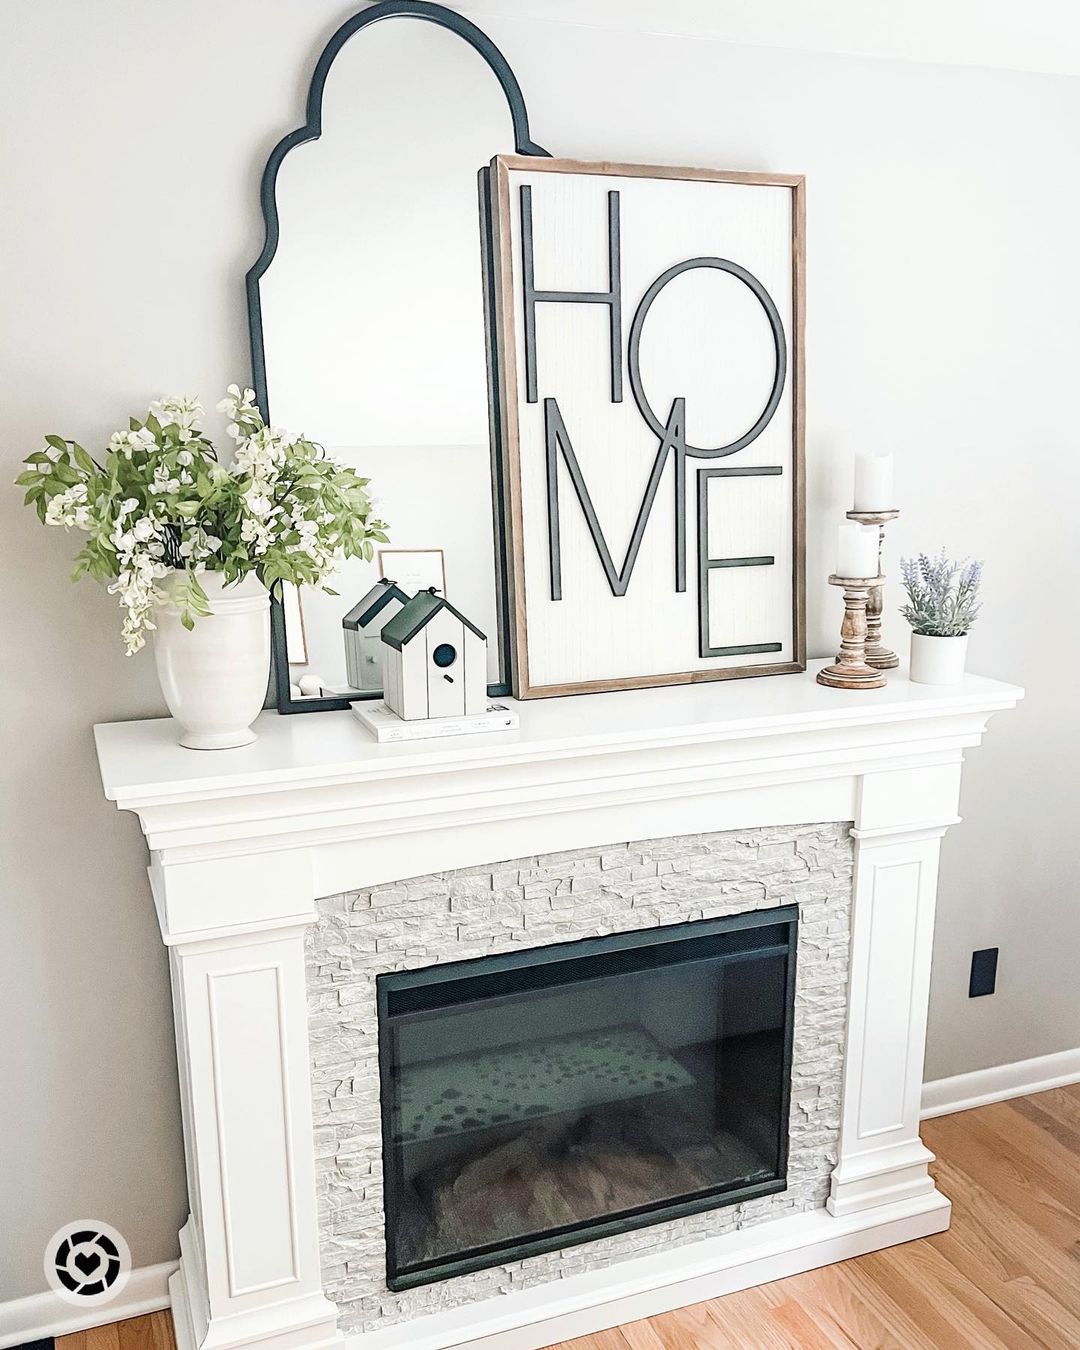 Minimalist Mantel with Modern Accents and Fresh Greenery